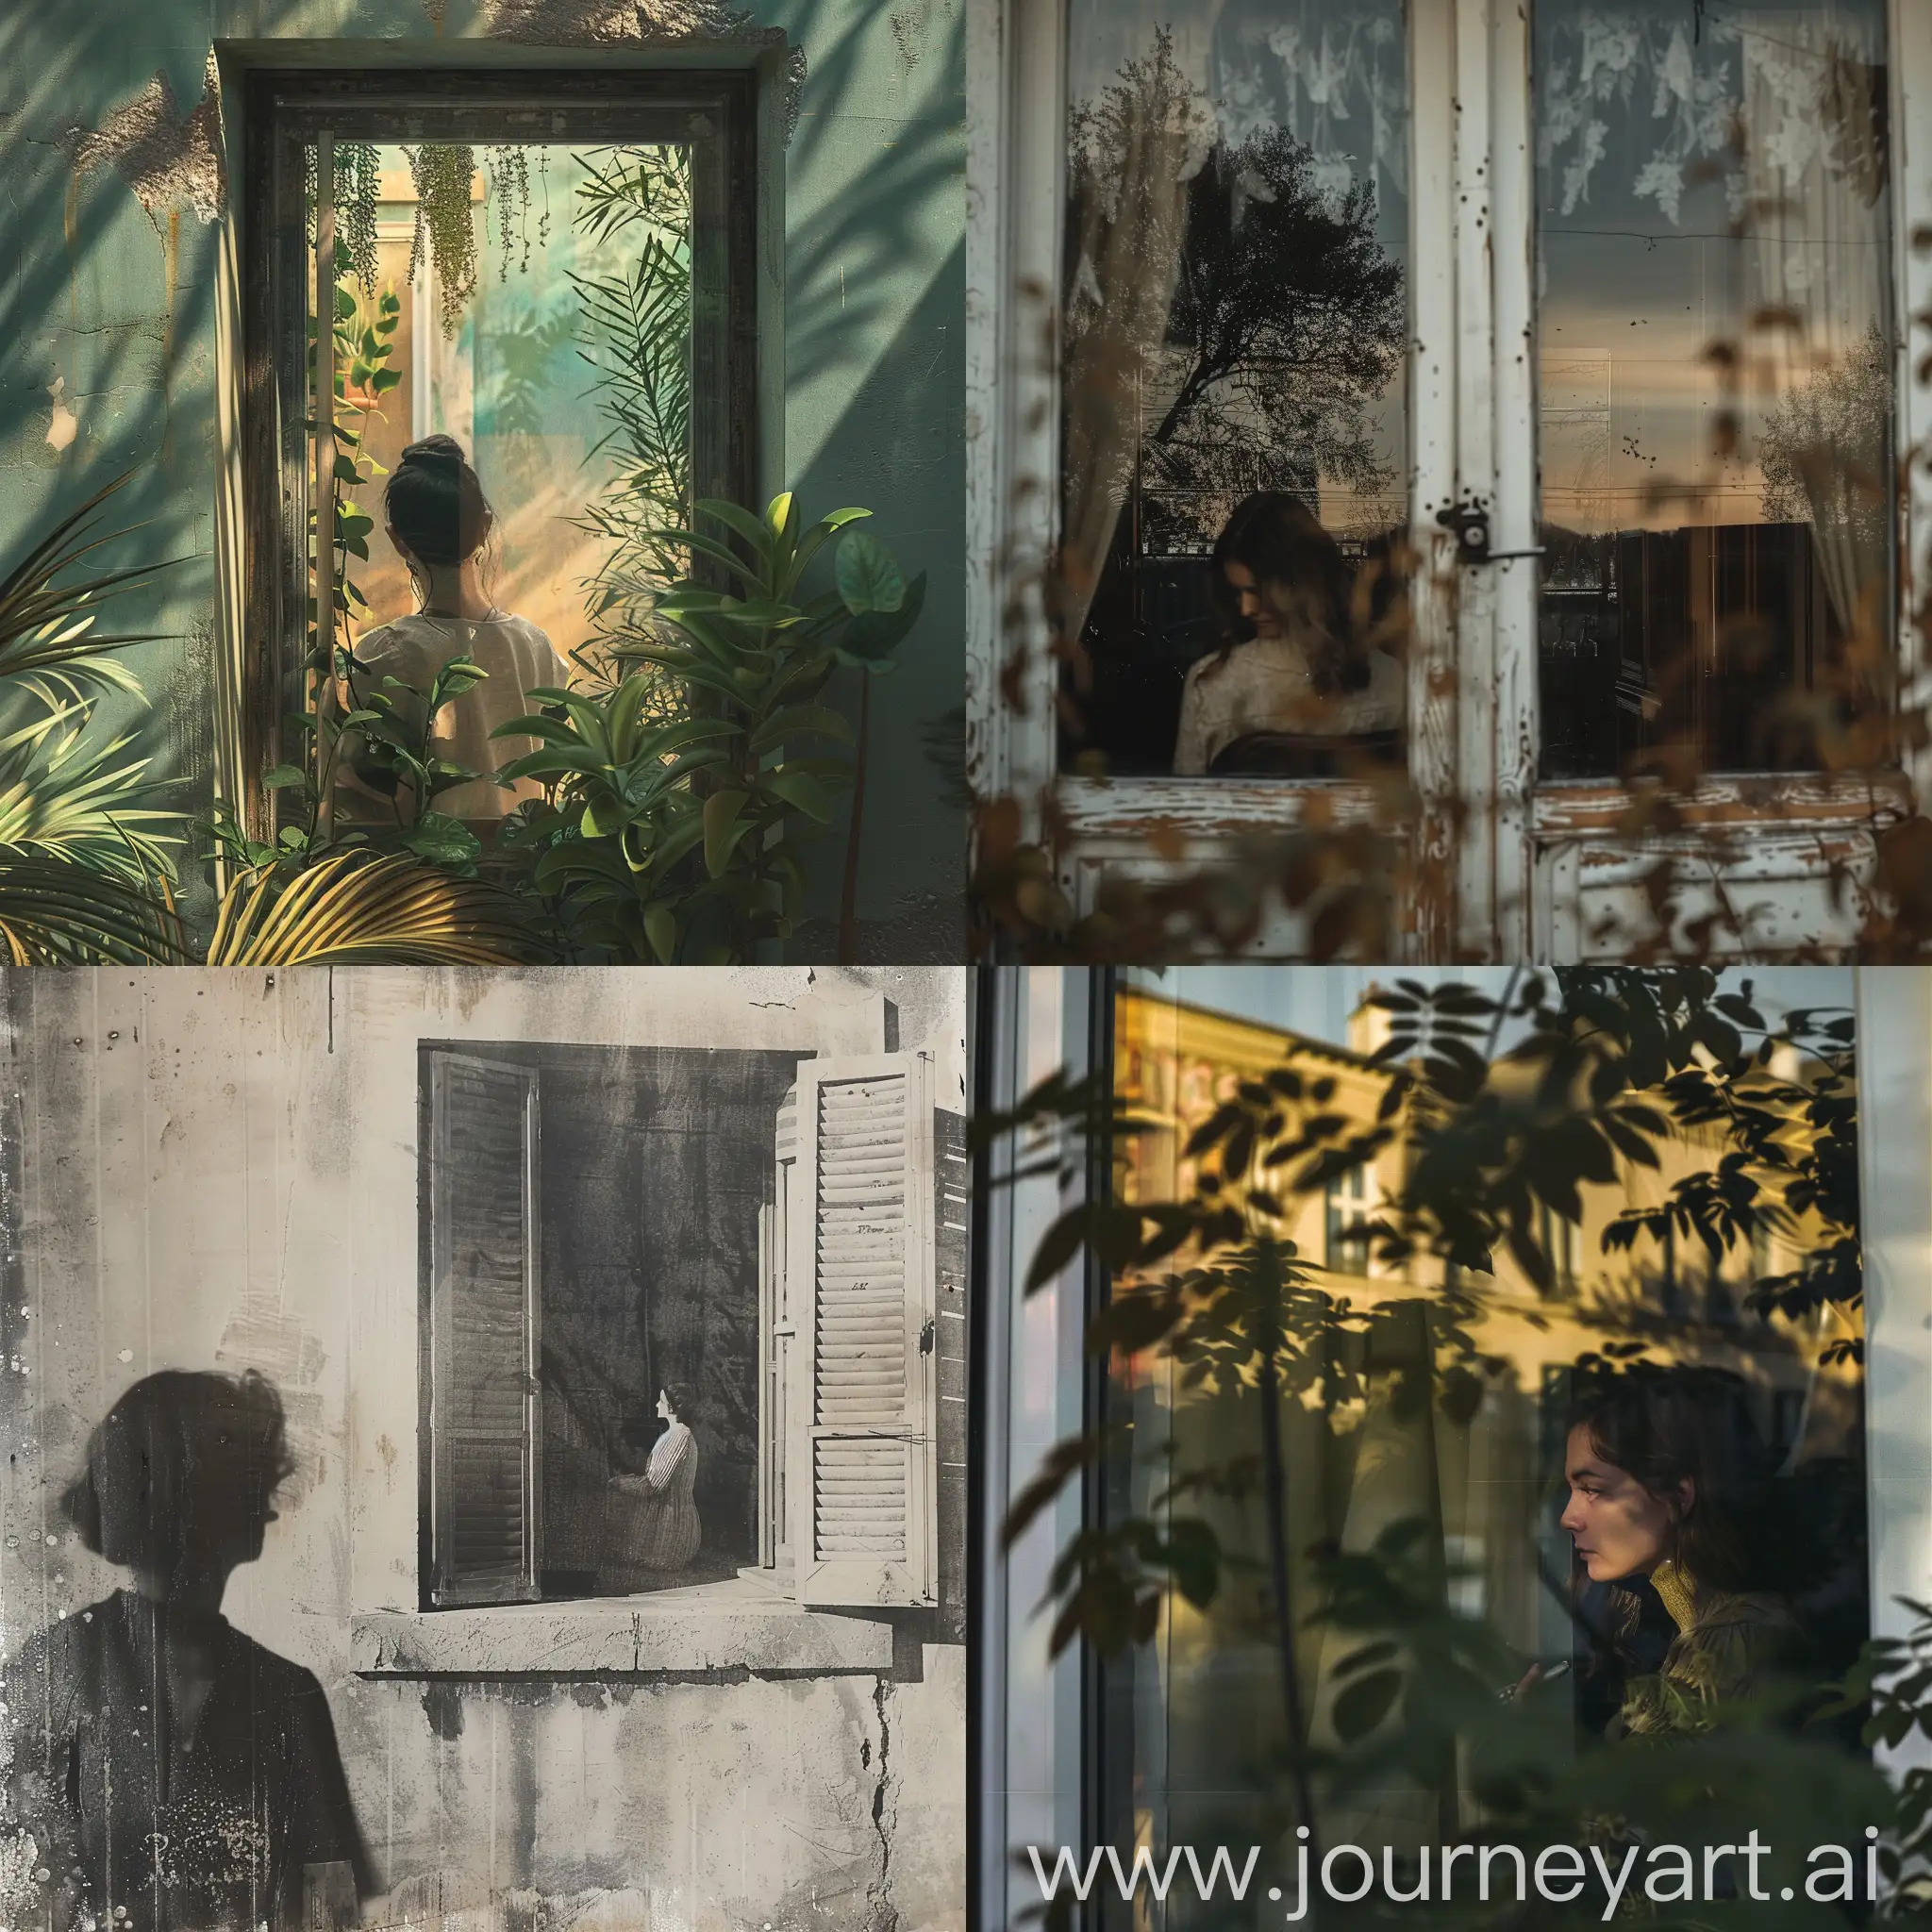 Cozy-Evening-Woman-in-Illuminated-Window-Framed-by-Nature